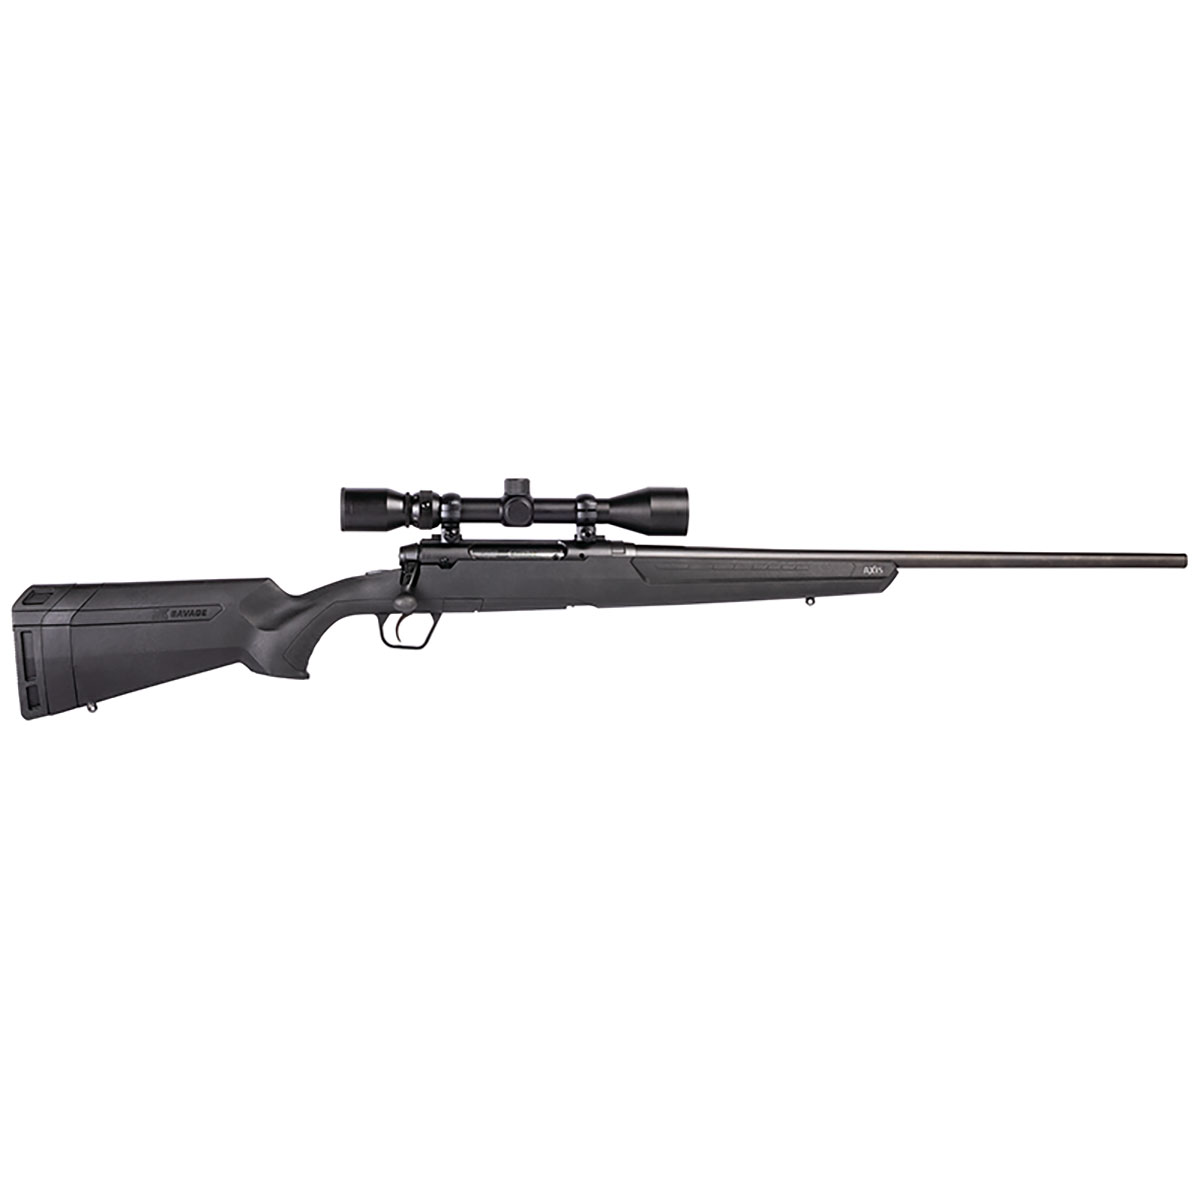 SAVAGE ARMS - Savage Axis Xp 30-06 Spfld 22" Bbl Weaver Scope Blk